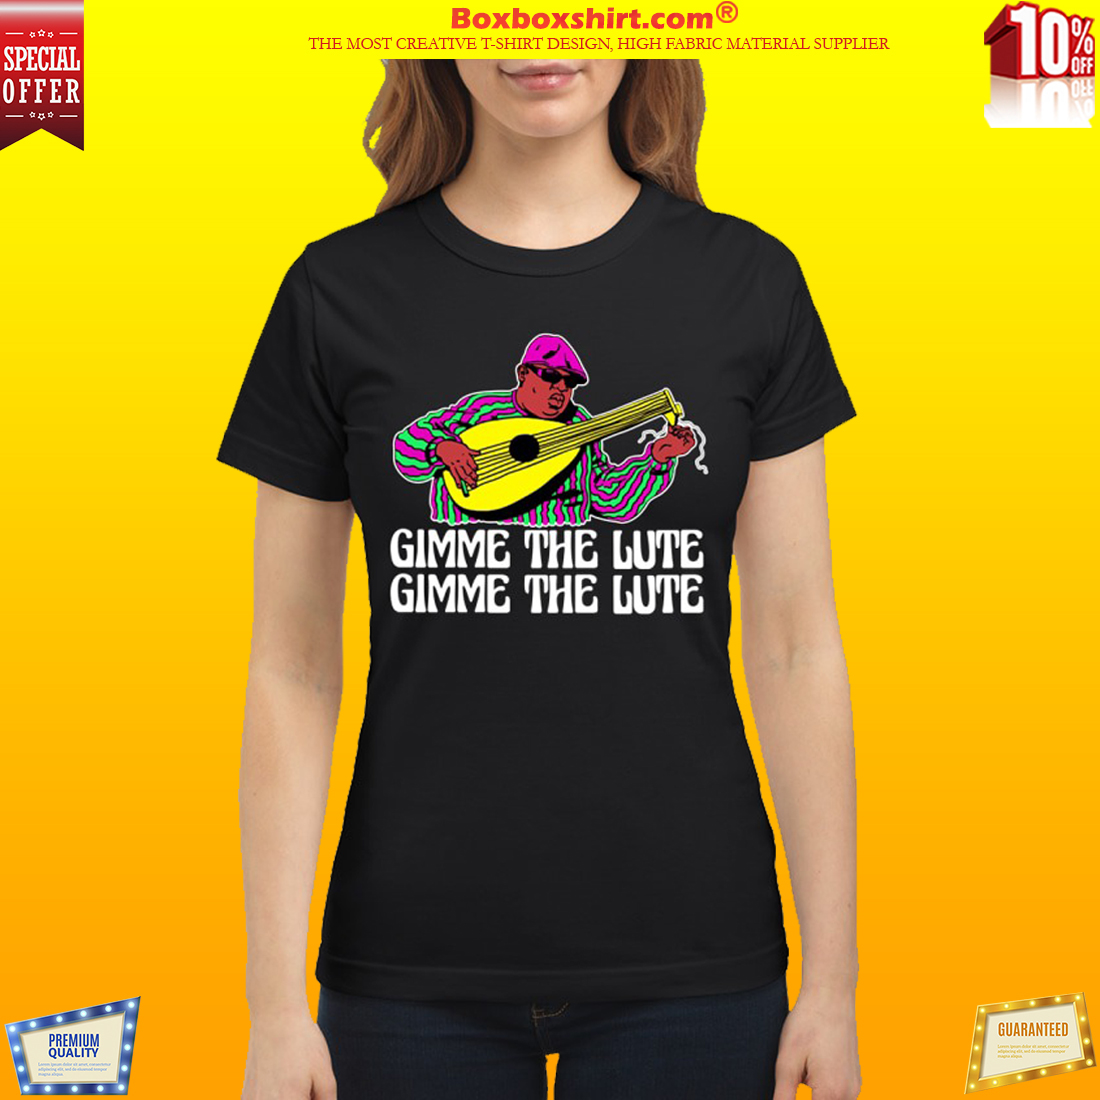 Notrorious BIG gimme the lute classic shirt